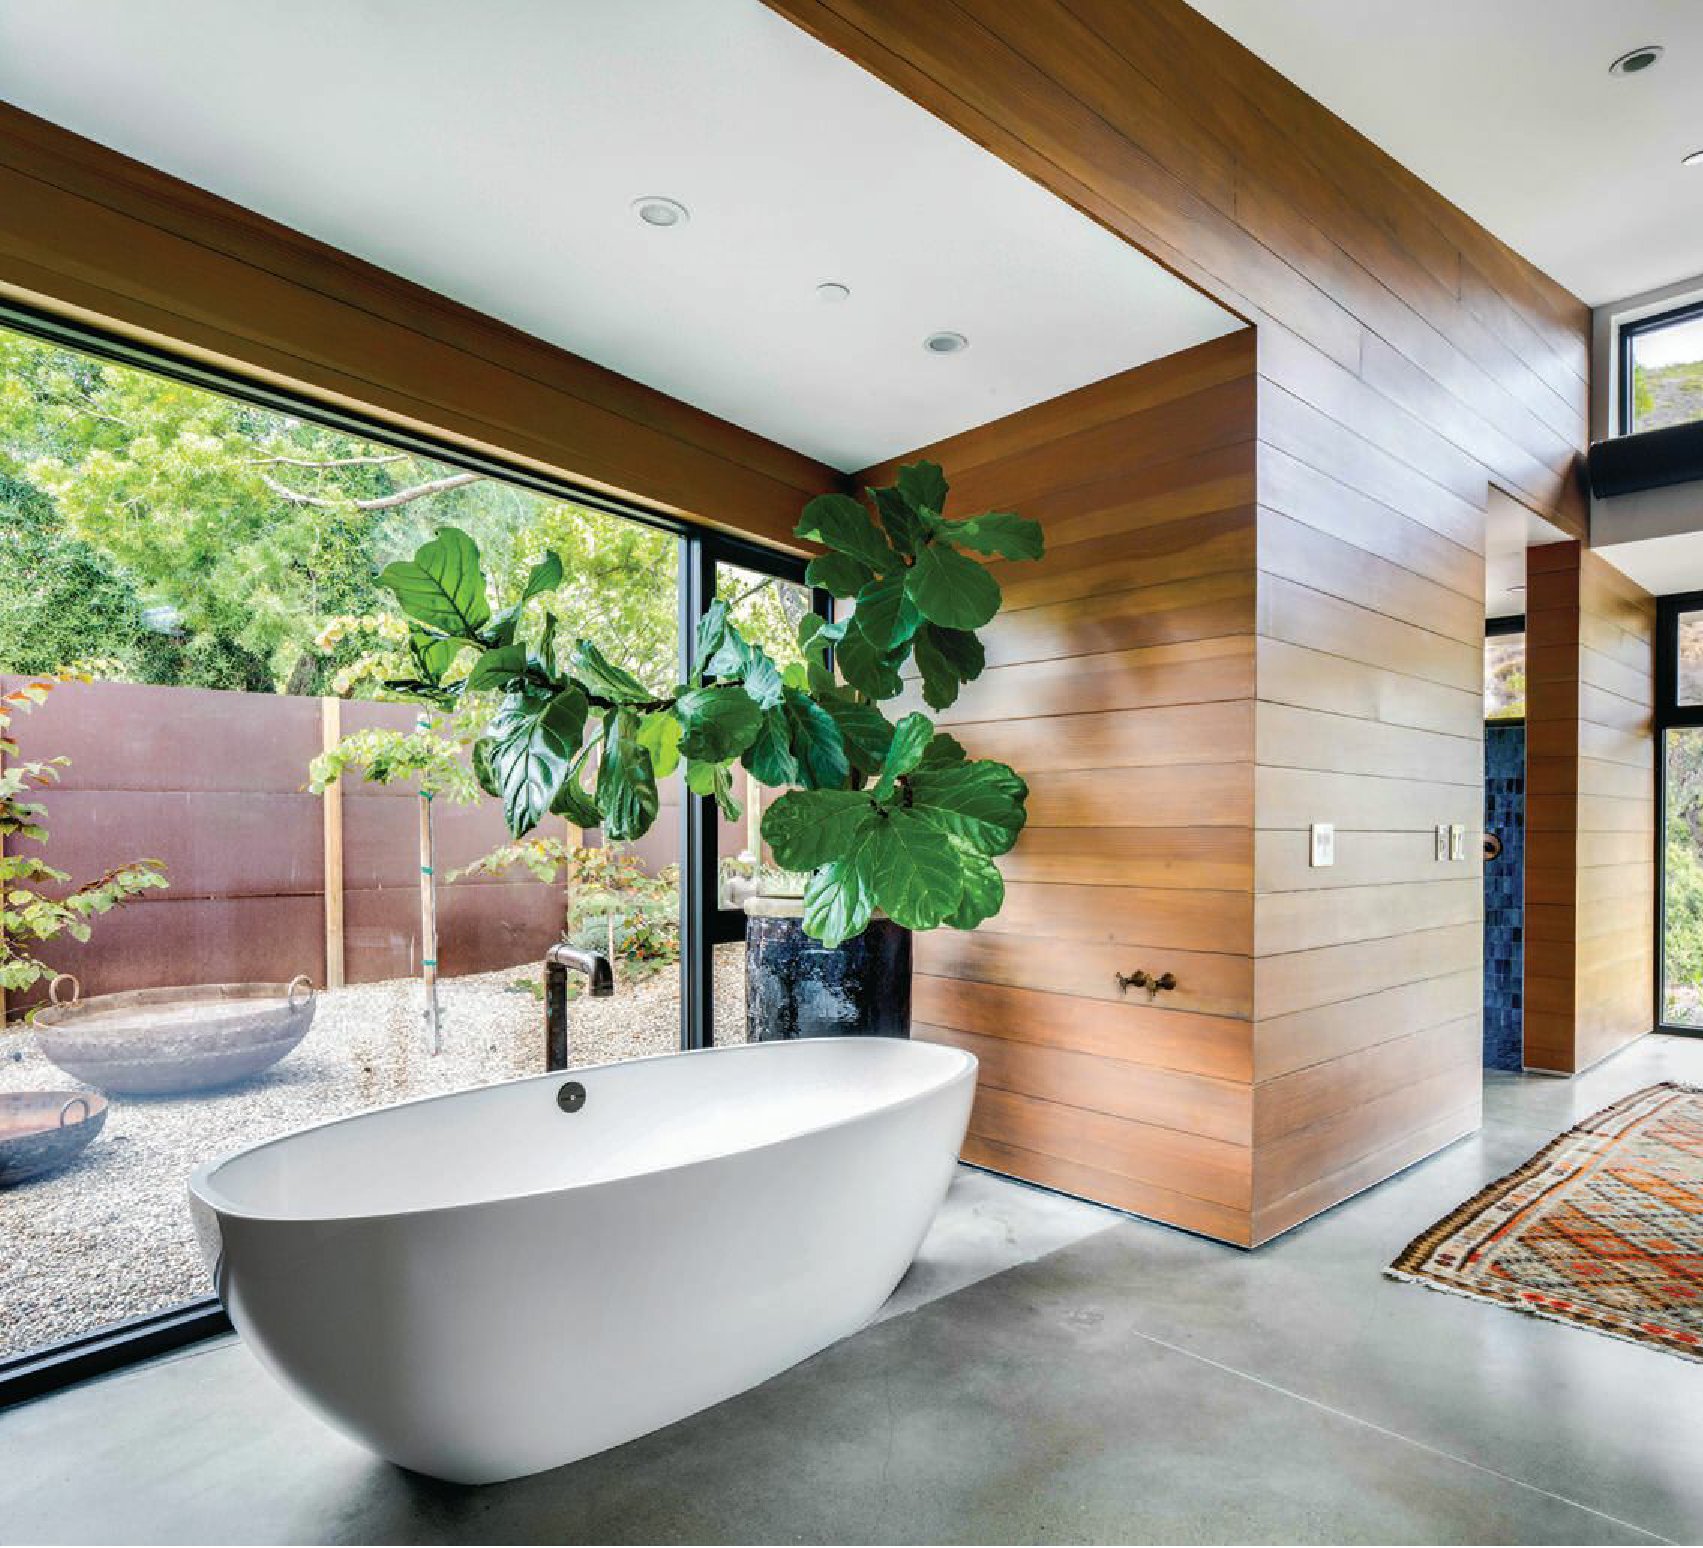 In the primary suite, Pirch’s Victoria    Albert free-standing soaker tub,  which sports a faucet designed by the  owner and constructed from plumbing  parts, overlooks a private yard  enclosed by a fence fabricated from  Corten steel. The rug was found at The  Garage Collective in Laguna Beach. PHOTOGRAPHED BY CHAD MELLON